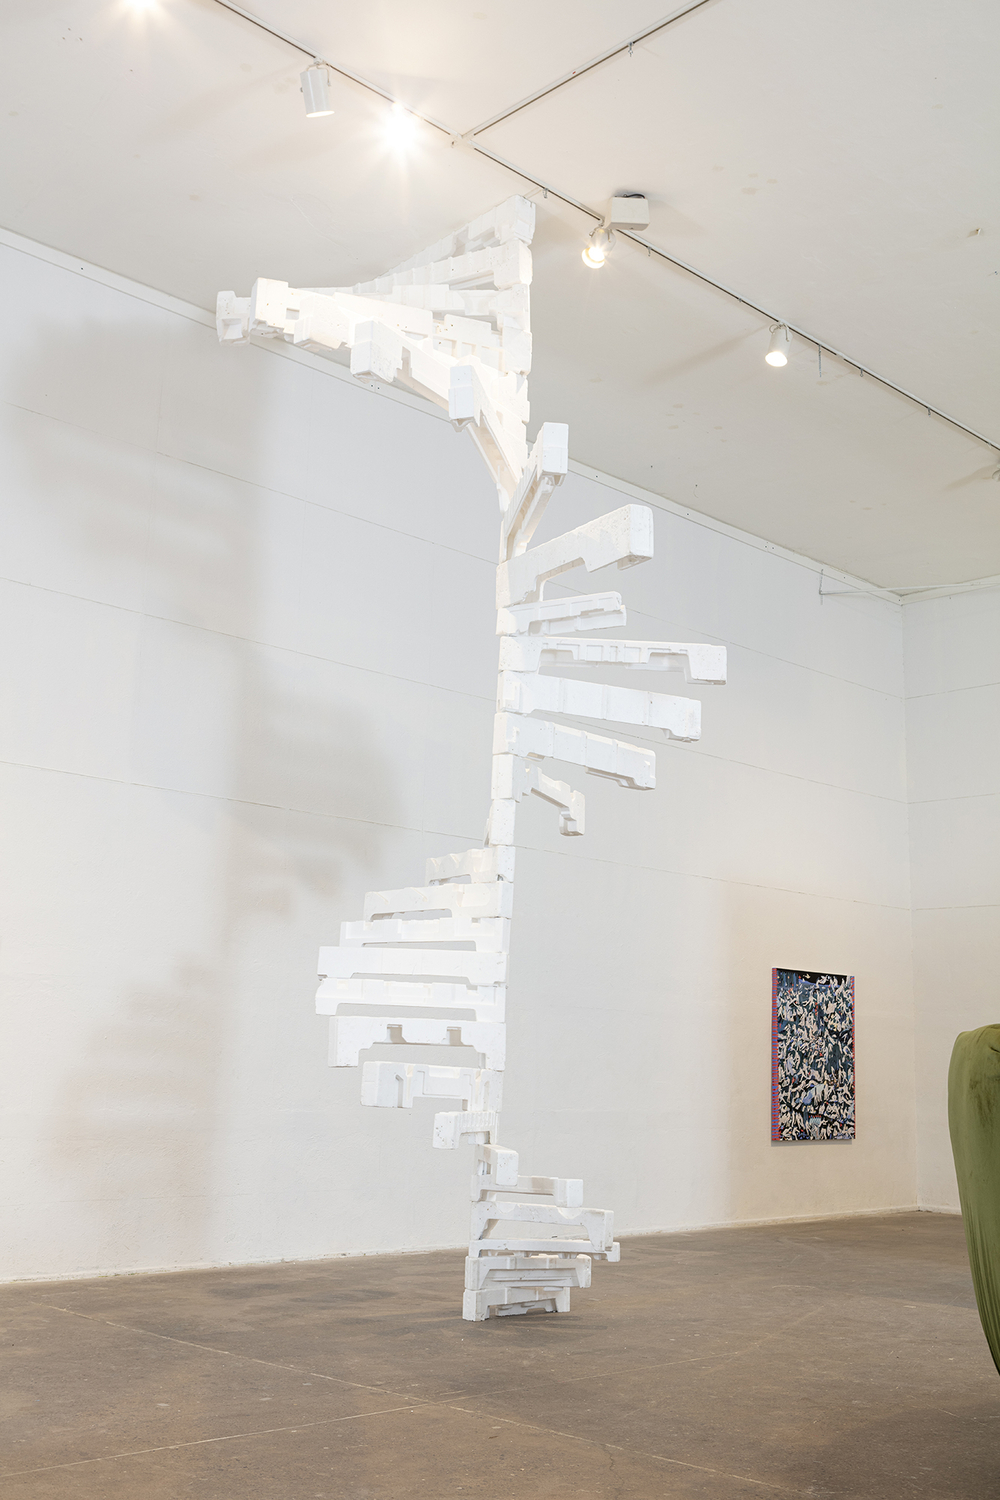 Sculpture resembling white spiral staircase except that steps are too thin to be actual steps